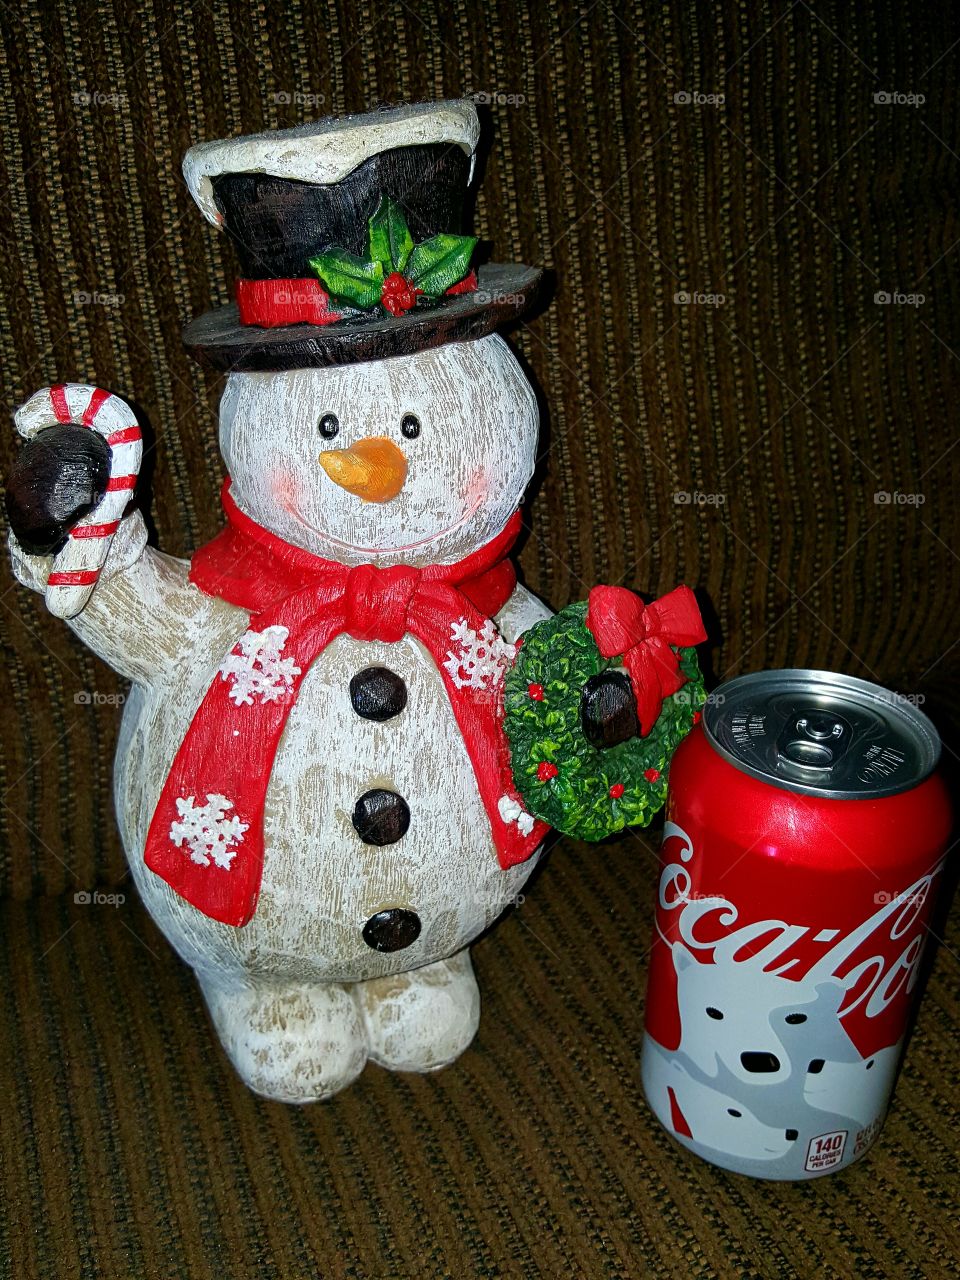 Like me, Frosty enjoys relaxing with a refreshing sip of Coca Cola from time to time!